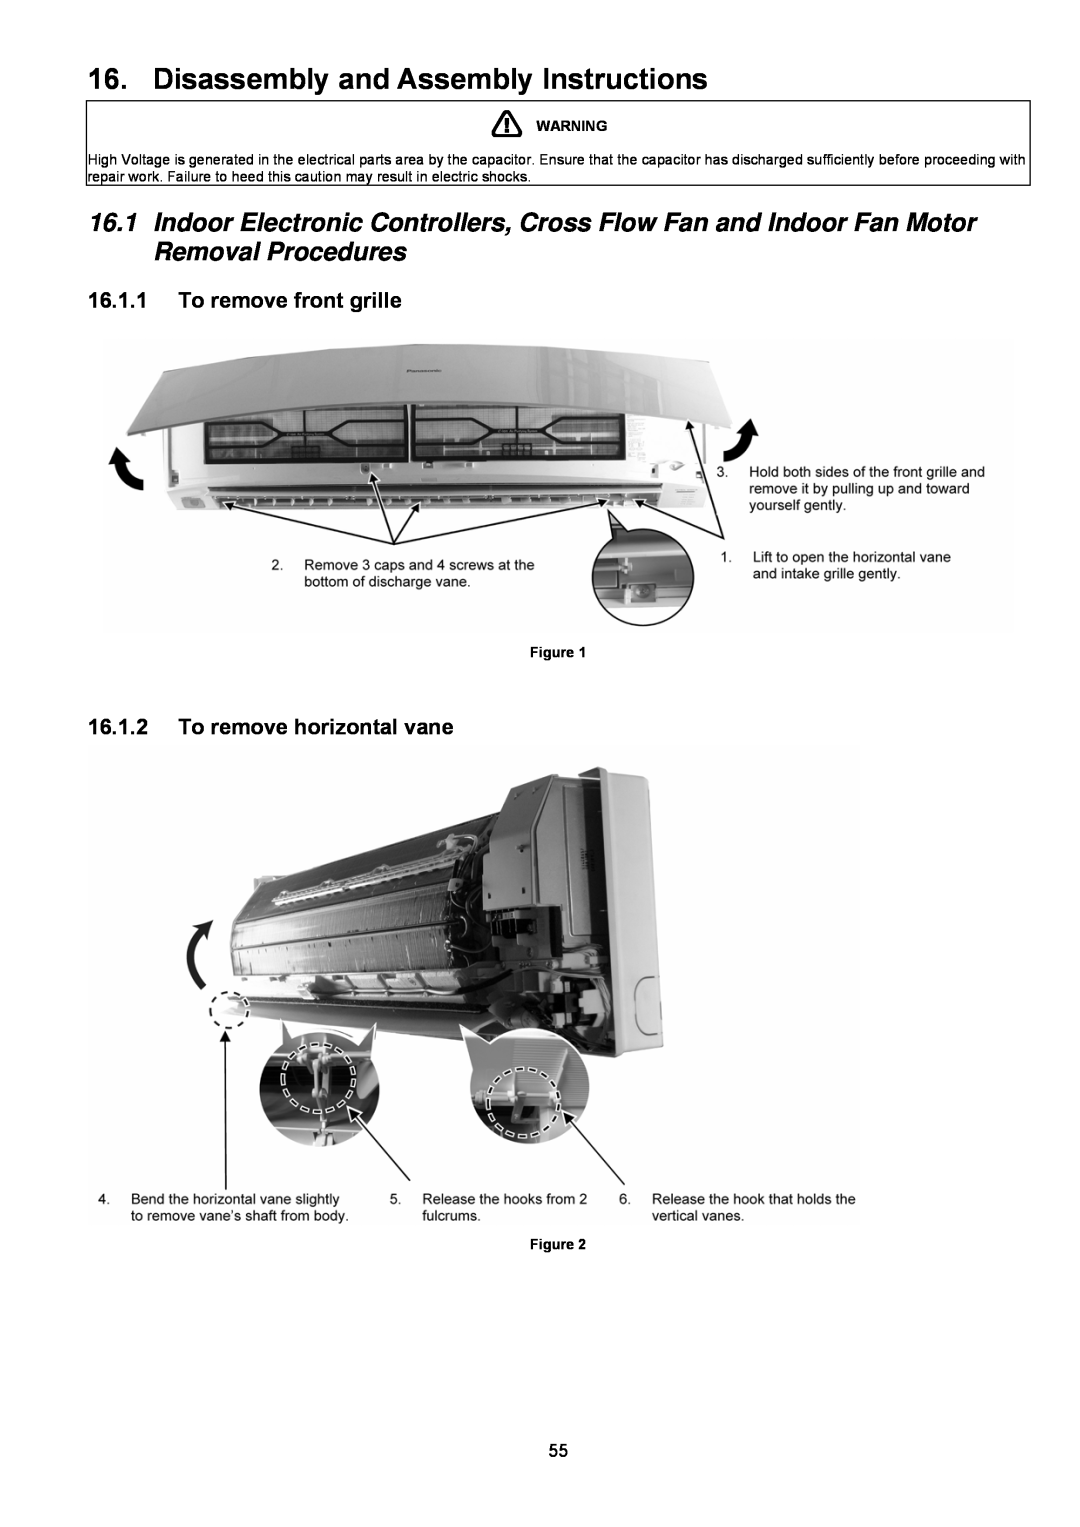 Panasonic CS-C24KKS Disassembly and Assembly Instructions, 16.1.1To remove front grille, 16.1.2To remove horizontal vane 